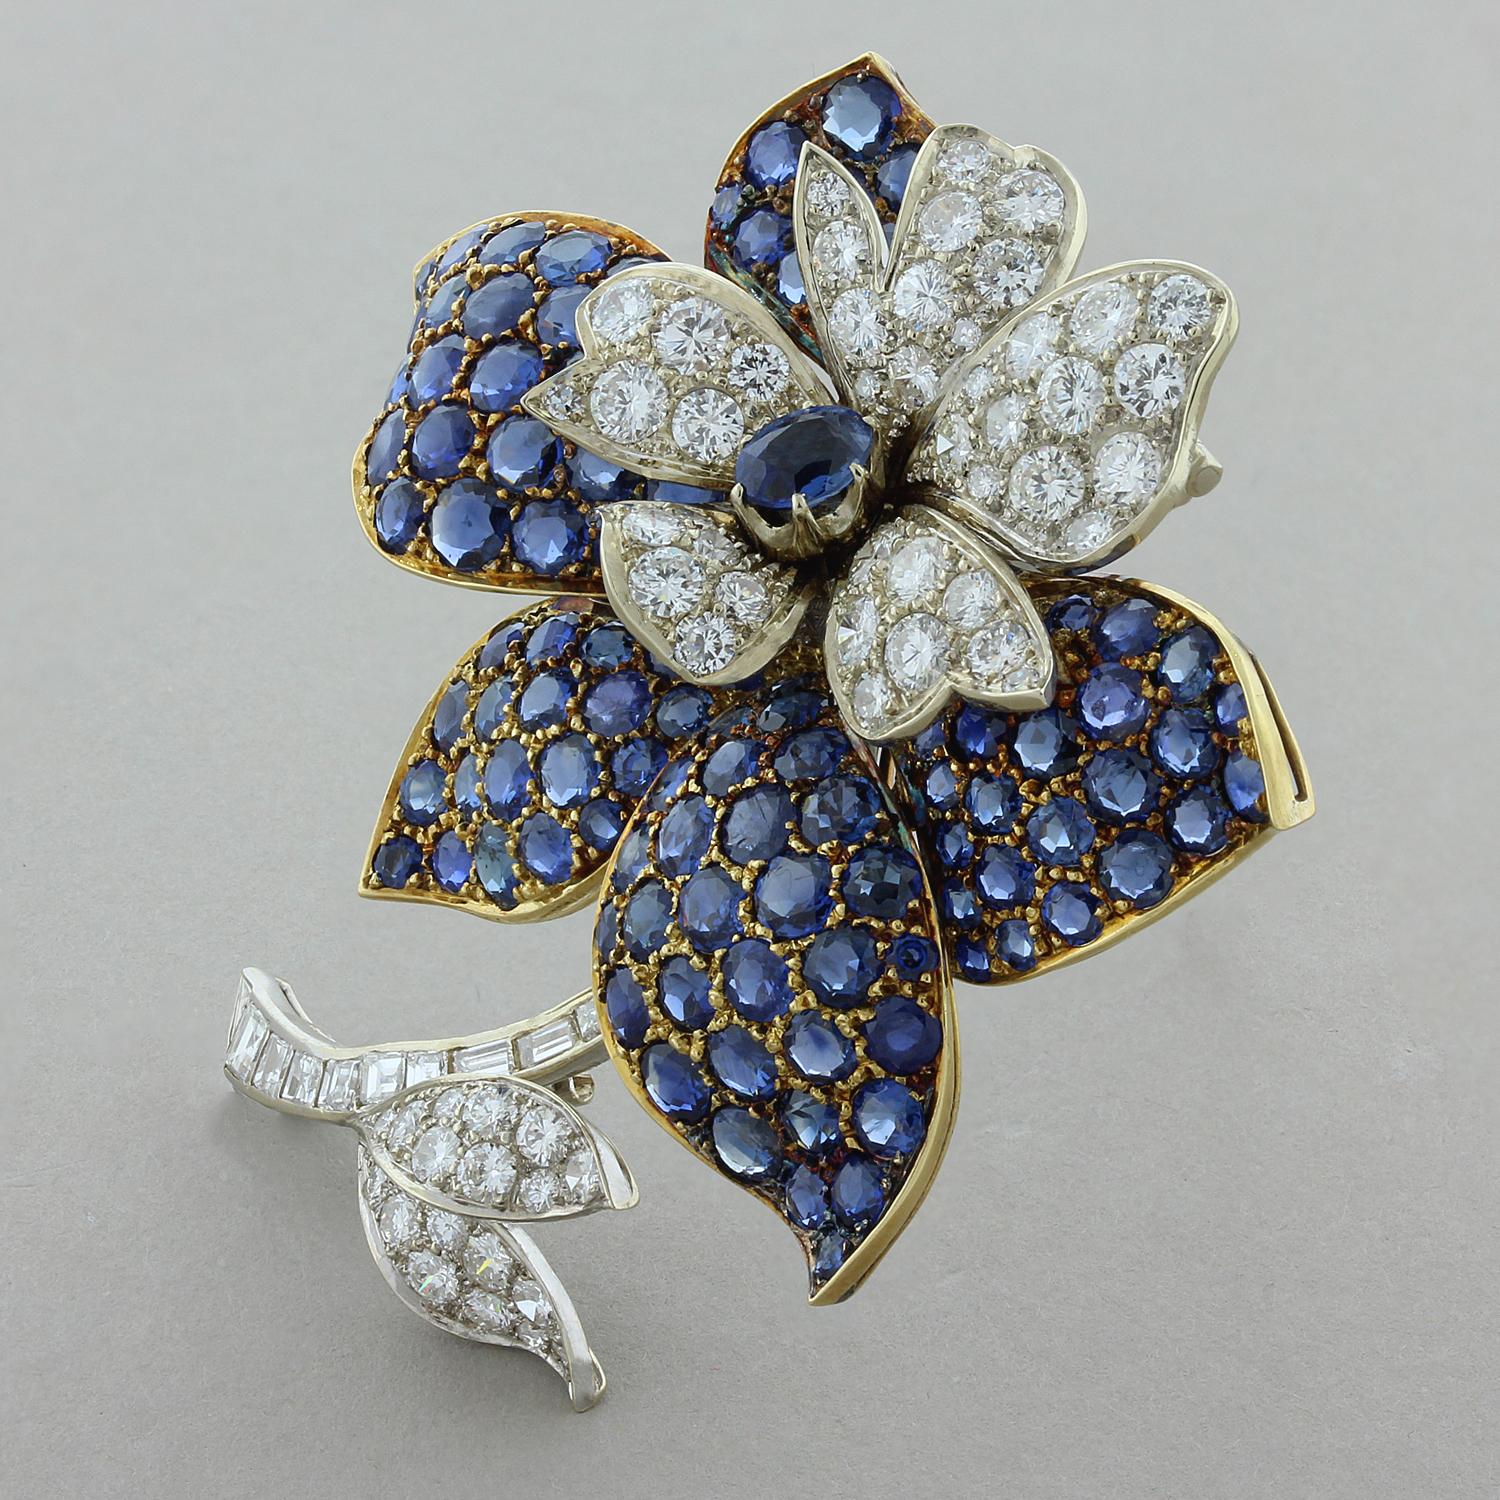 This exquisite flower blossom features 12 carats of round cut blue sapphires set in 18K yellow gold that make up the outer petals the flower. The center of the flower is detailed with five smaller diamond petals and a diamond stem with two leaves on